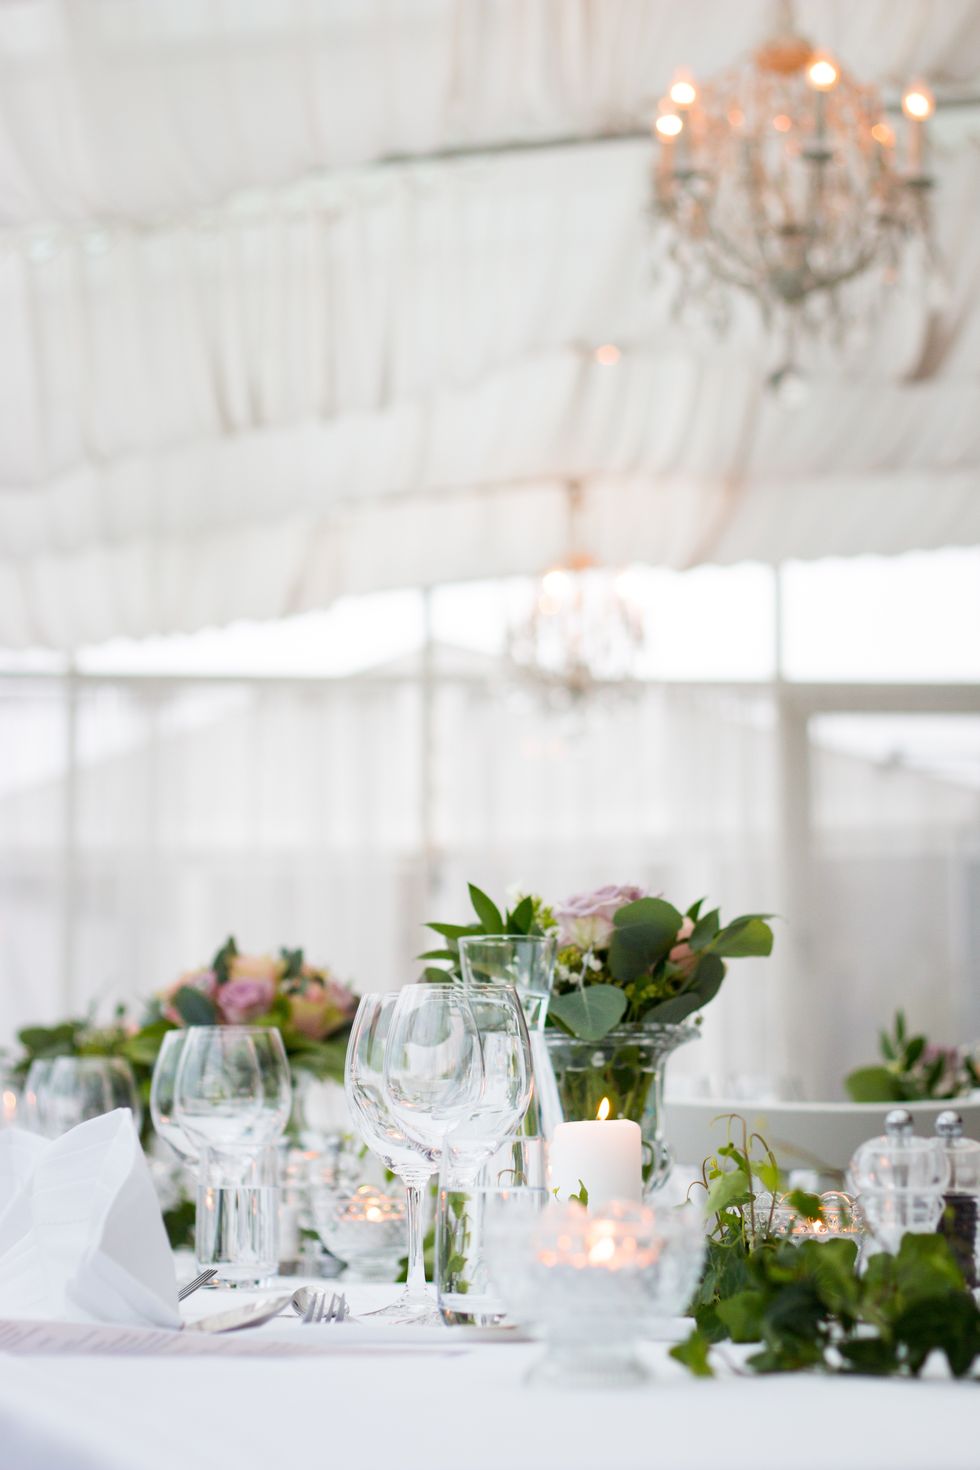 White, Photograph, Centrepiece, Green, Yellow, Rehearsal dinner, Flower, Table, Floral design, Flower Arranging, 